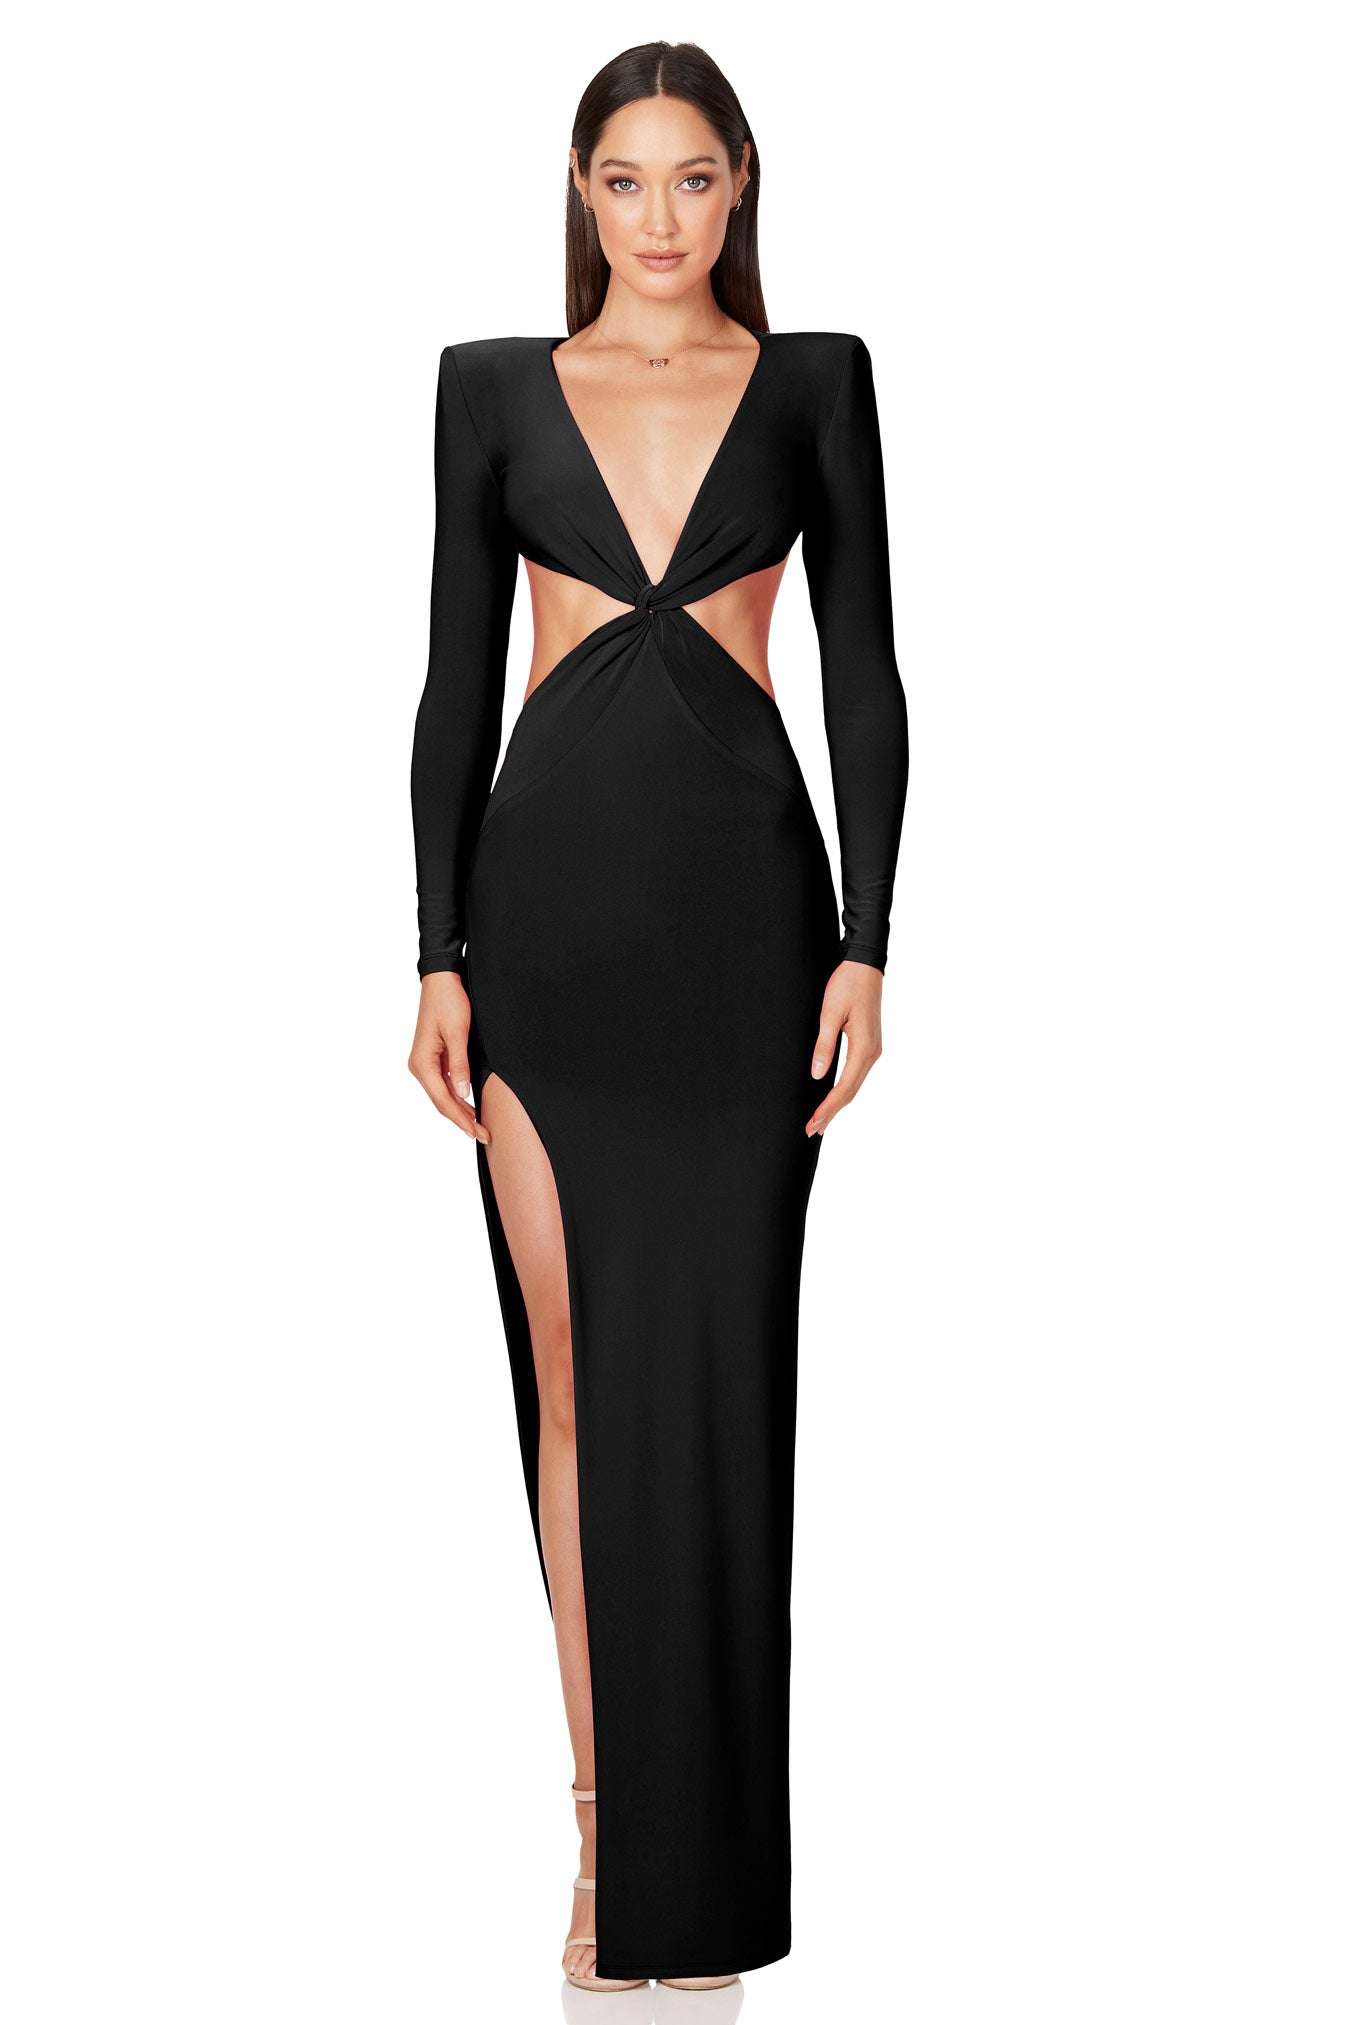 NOOKIE Jewel Gown (Black) - Rent this dress! | Dress for a Night